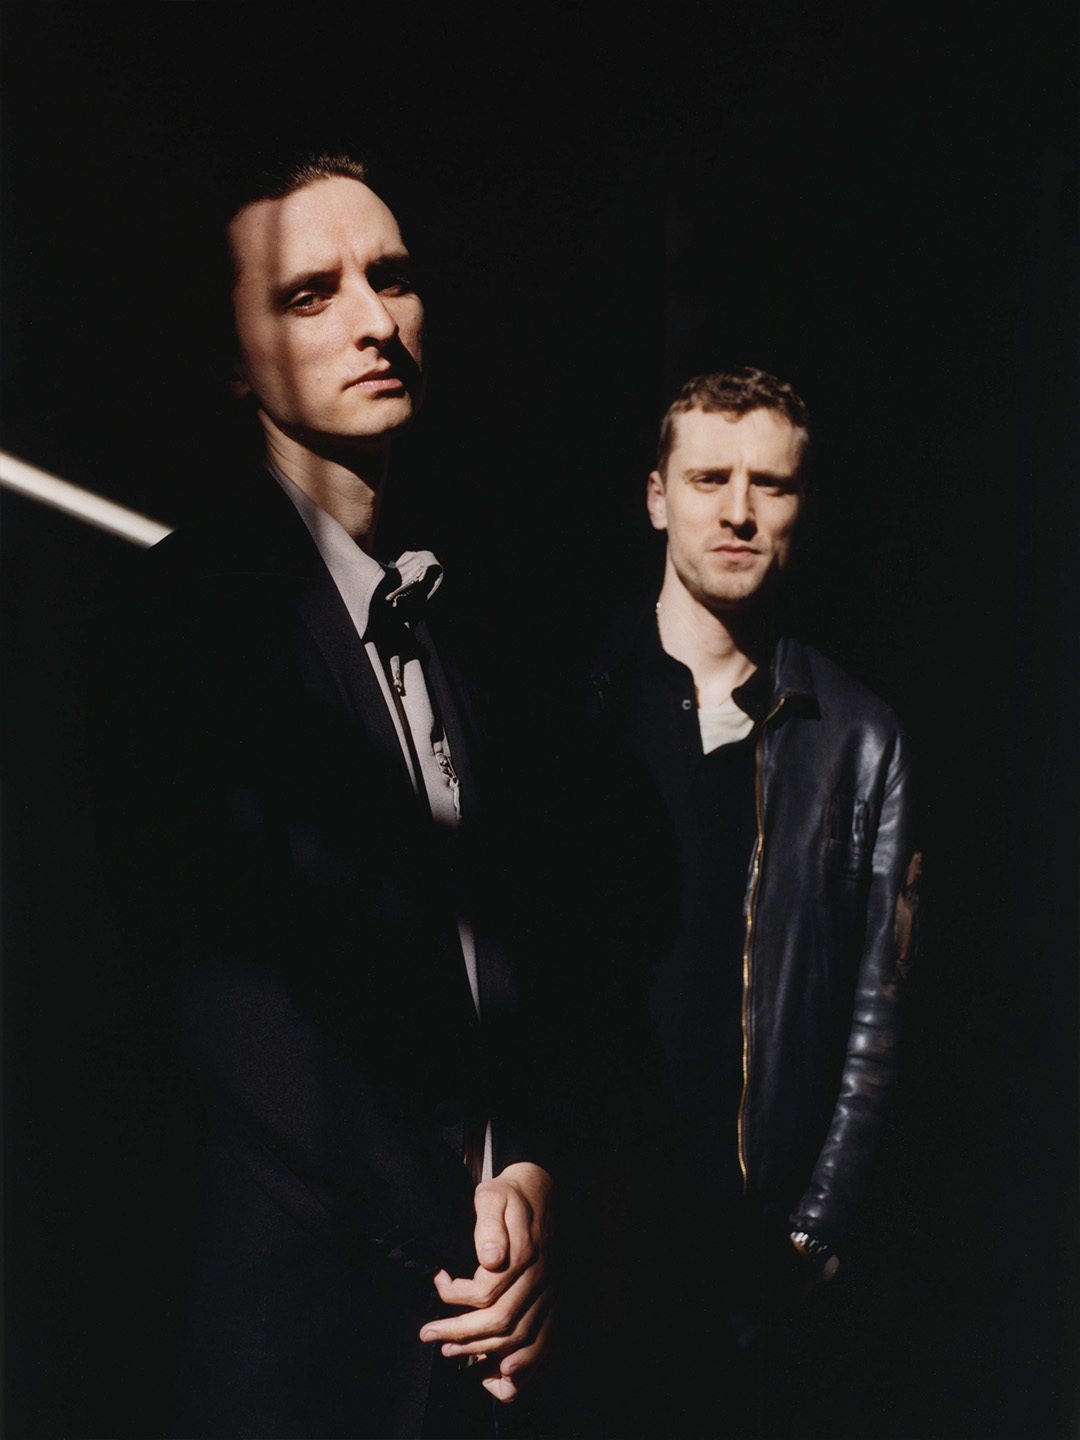 These New Puritans © Oscar Eckle